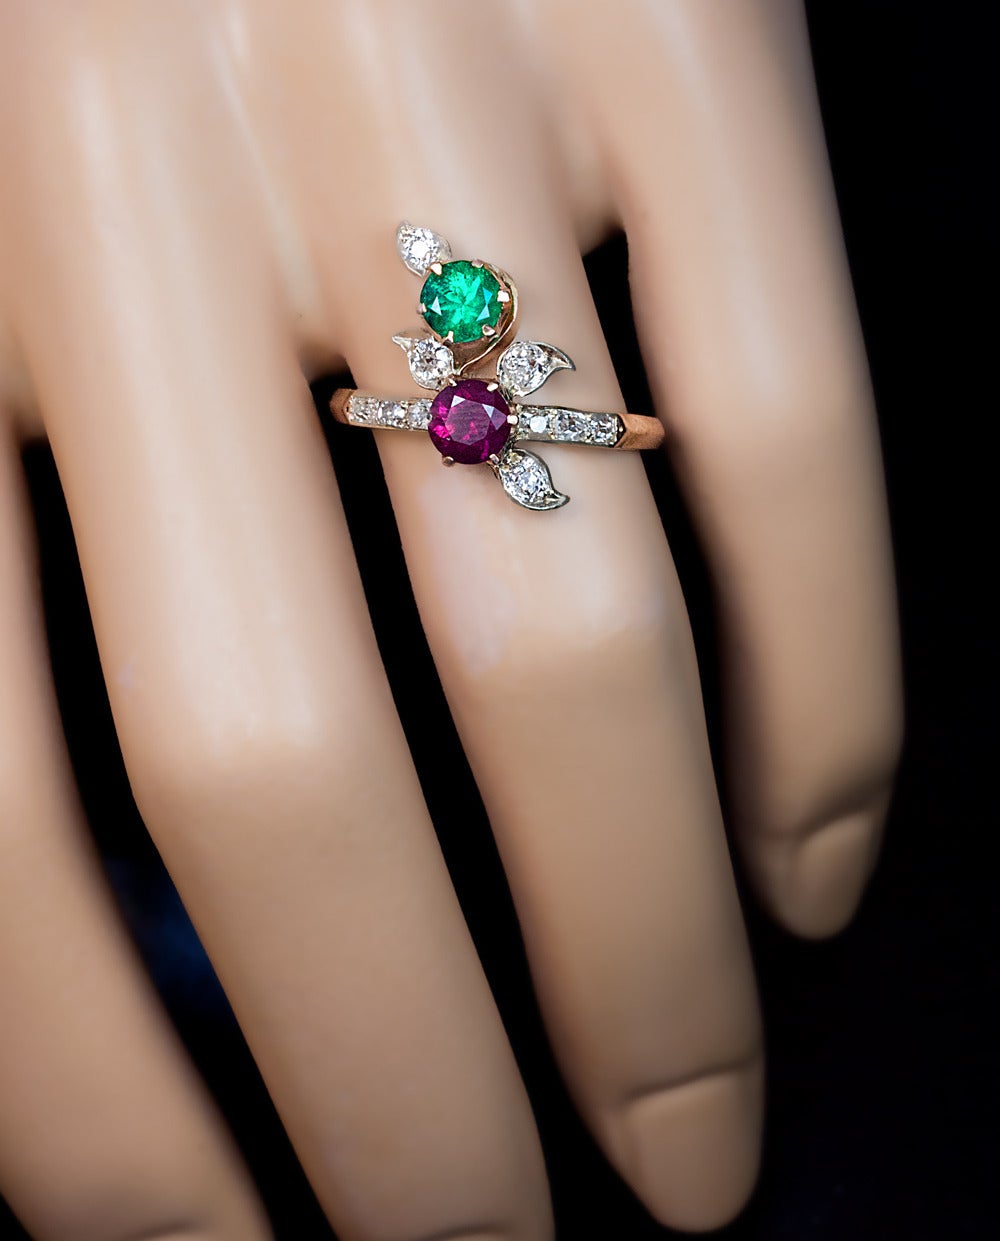 Made in St. Petersburg between 1904 and 1908

The 14K rose gold ring is designed as a stylized flower in Art Nouveau taste.
The ring is set with a round faceted emerald (approximately 0.37 ct), a round faceted ruby (approximately 0.60 ct), and